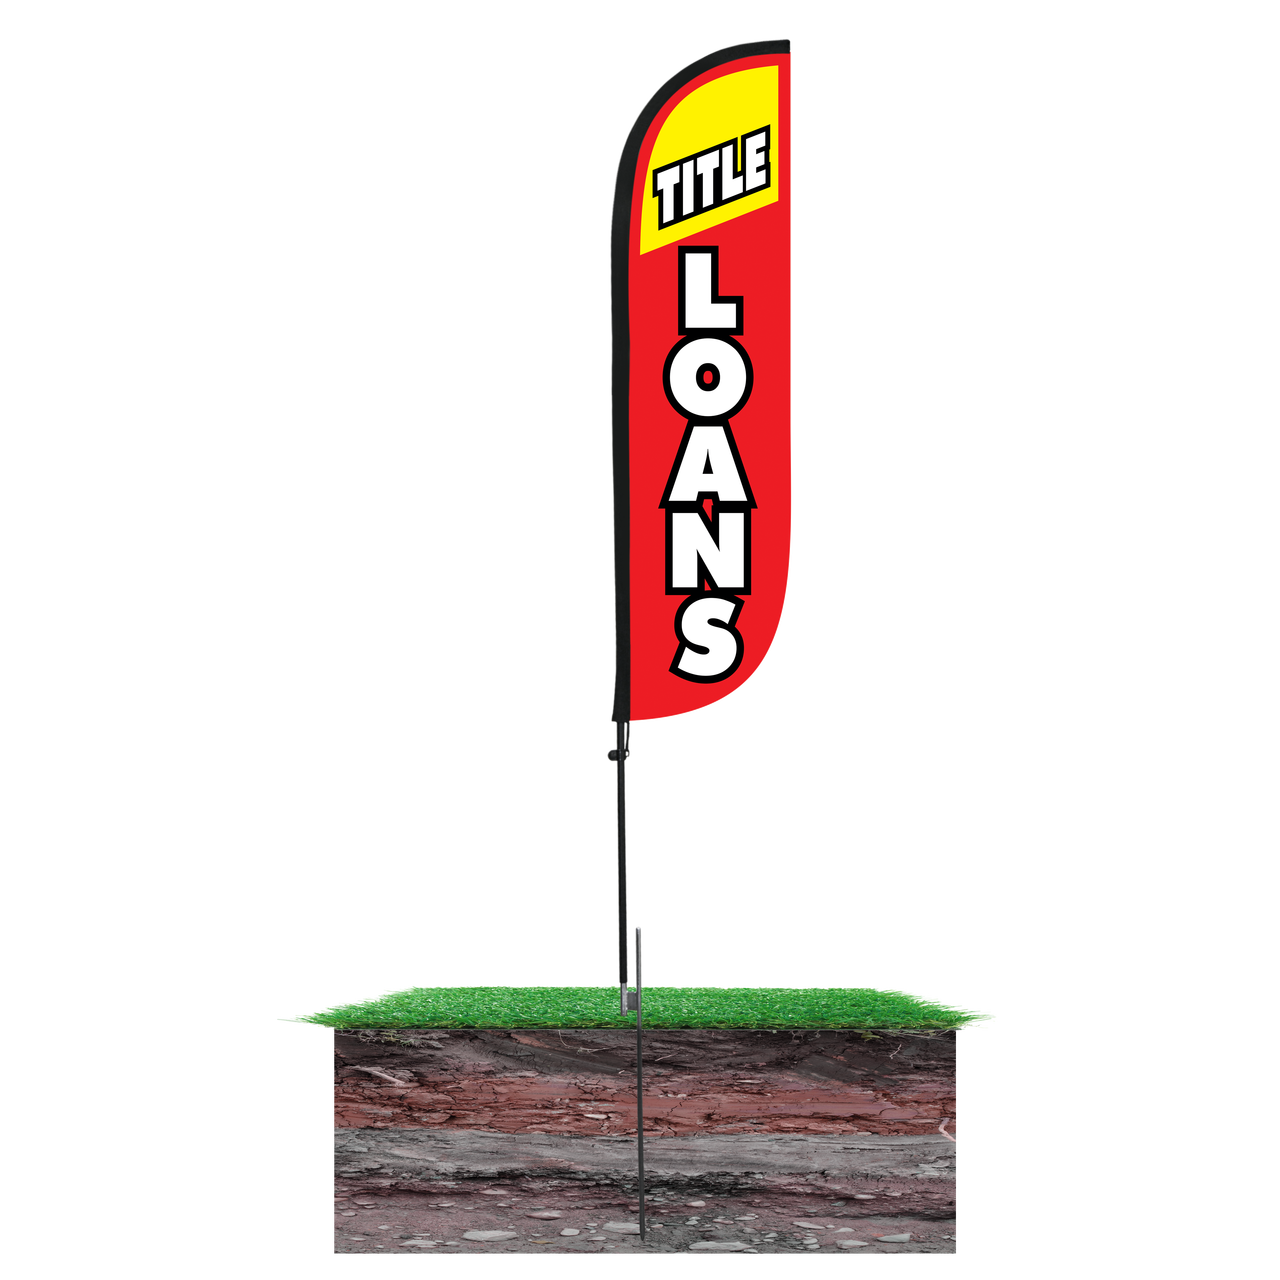 5ft Title Loans Feather Flag